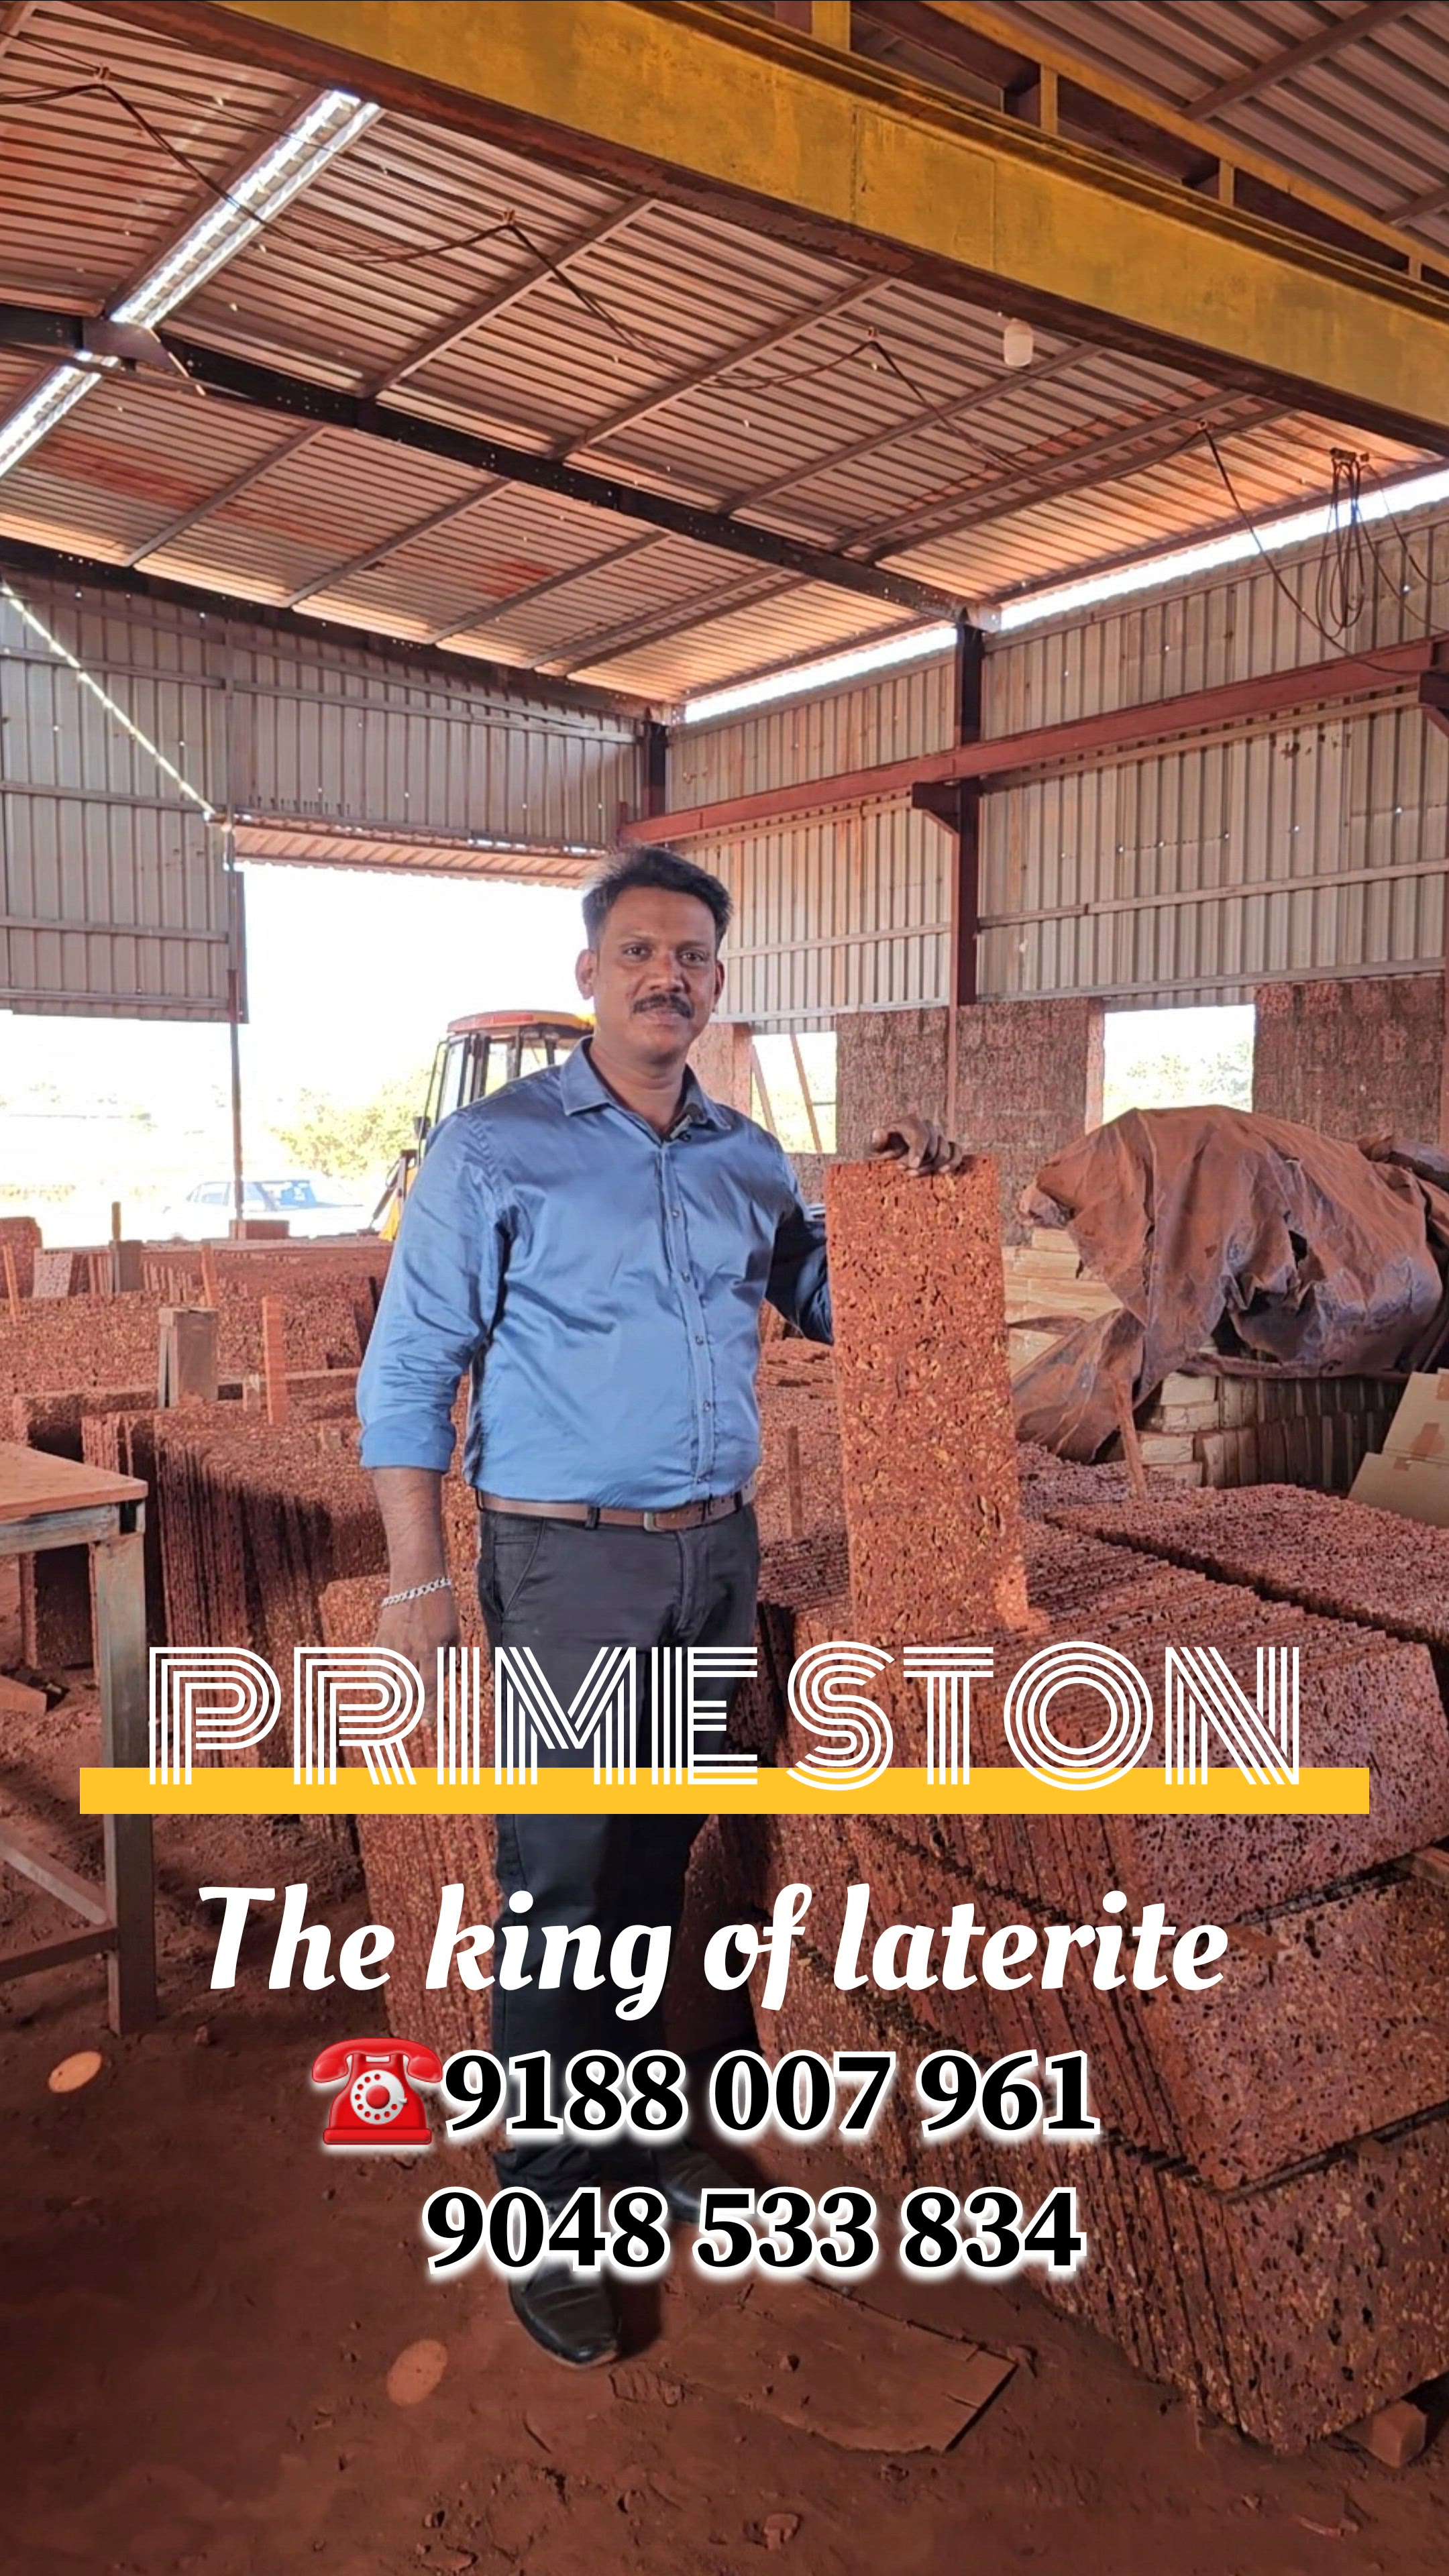 PRIME STON❤️
The king of laterite
Laterite Cladding Tiles# Laterite Flooring Slabs# Laterite Paving Stones, Laterite Furniture's, Laterite Monuments, Laterite Single Pillars ...
💚100% Natural Laterite Stone Products Manufacturer and laying contractor 💚
Our Service Available Allover India

Pillars available sizes..
From 24×6×6 to 7×12×12

Cladding available Sizes....
12/6,12/7,15/9,18/9,21/9,24/9 inches 20 mm thickness...

Paving available sizes....
12×12, 18×18, 24×24 inches 50 mm thickness

Slabs available sizes....
6/2 feet 25mm, 40 mm, 50 mm, 100 mm

Laterite furnitures and customized sizes also available...

Contact - 7306 706 542, 9188 007 961
 

primelaterite@gmail.com 
www.primestone.co. in
https://youtu.be/CtoUAPbgX08
  #architect  #engineers  #traditional  #newhomesdesign